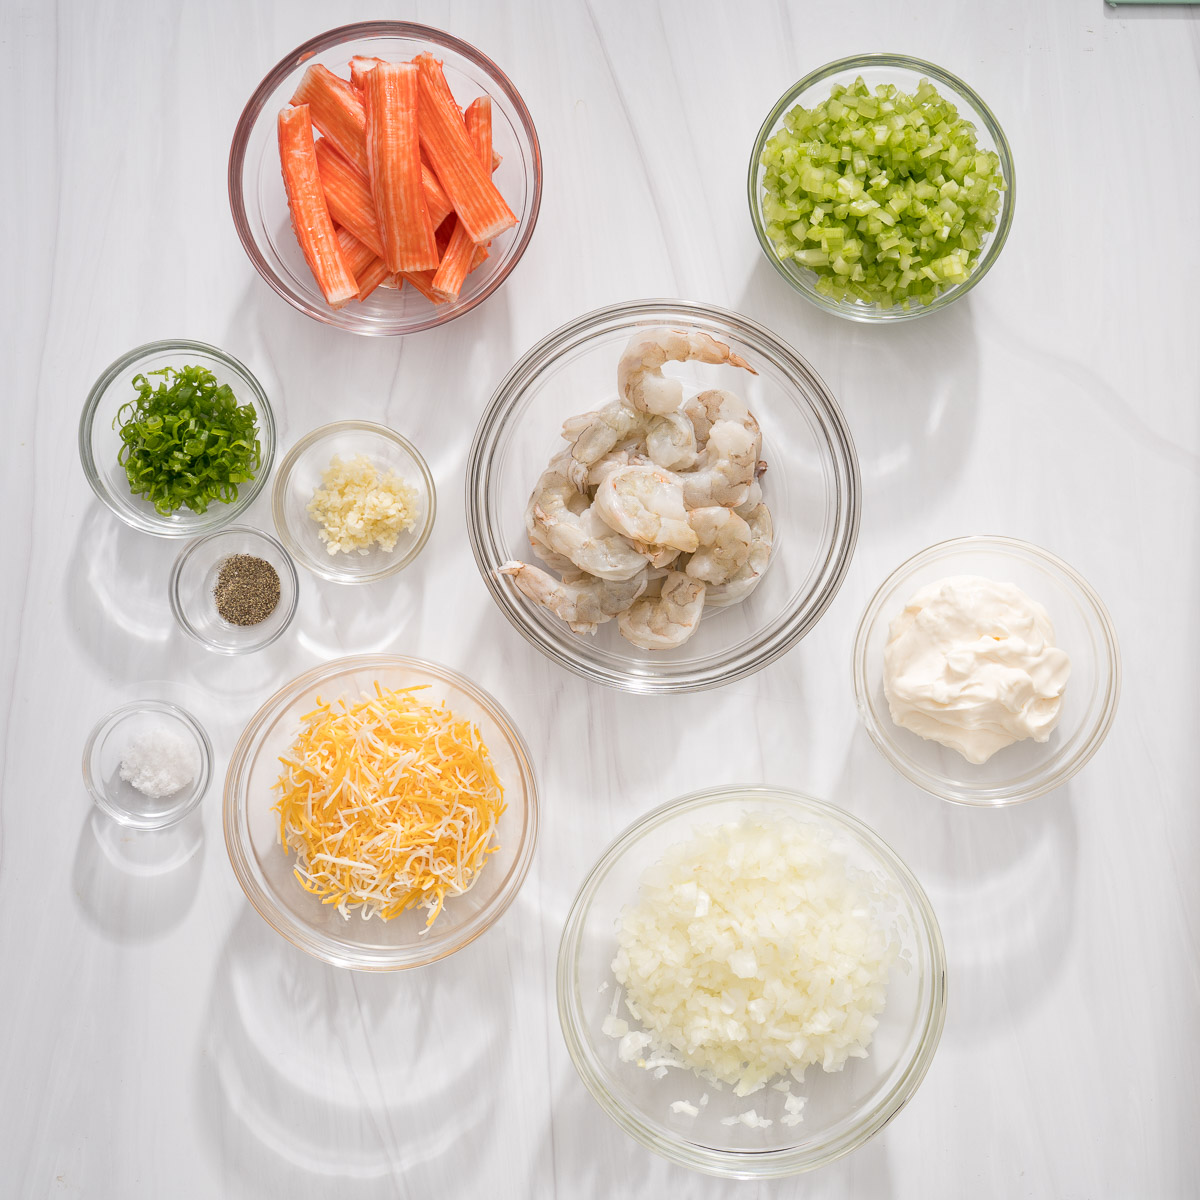 Looking down at the ingredients to make Vietnamese shrimp toast.